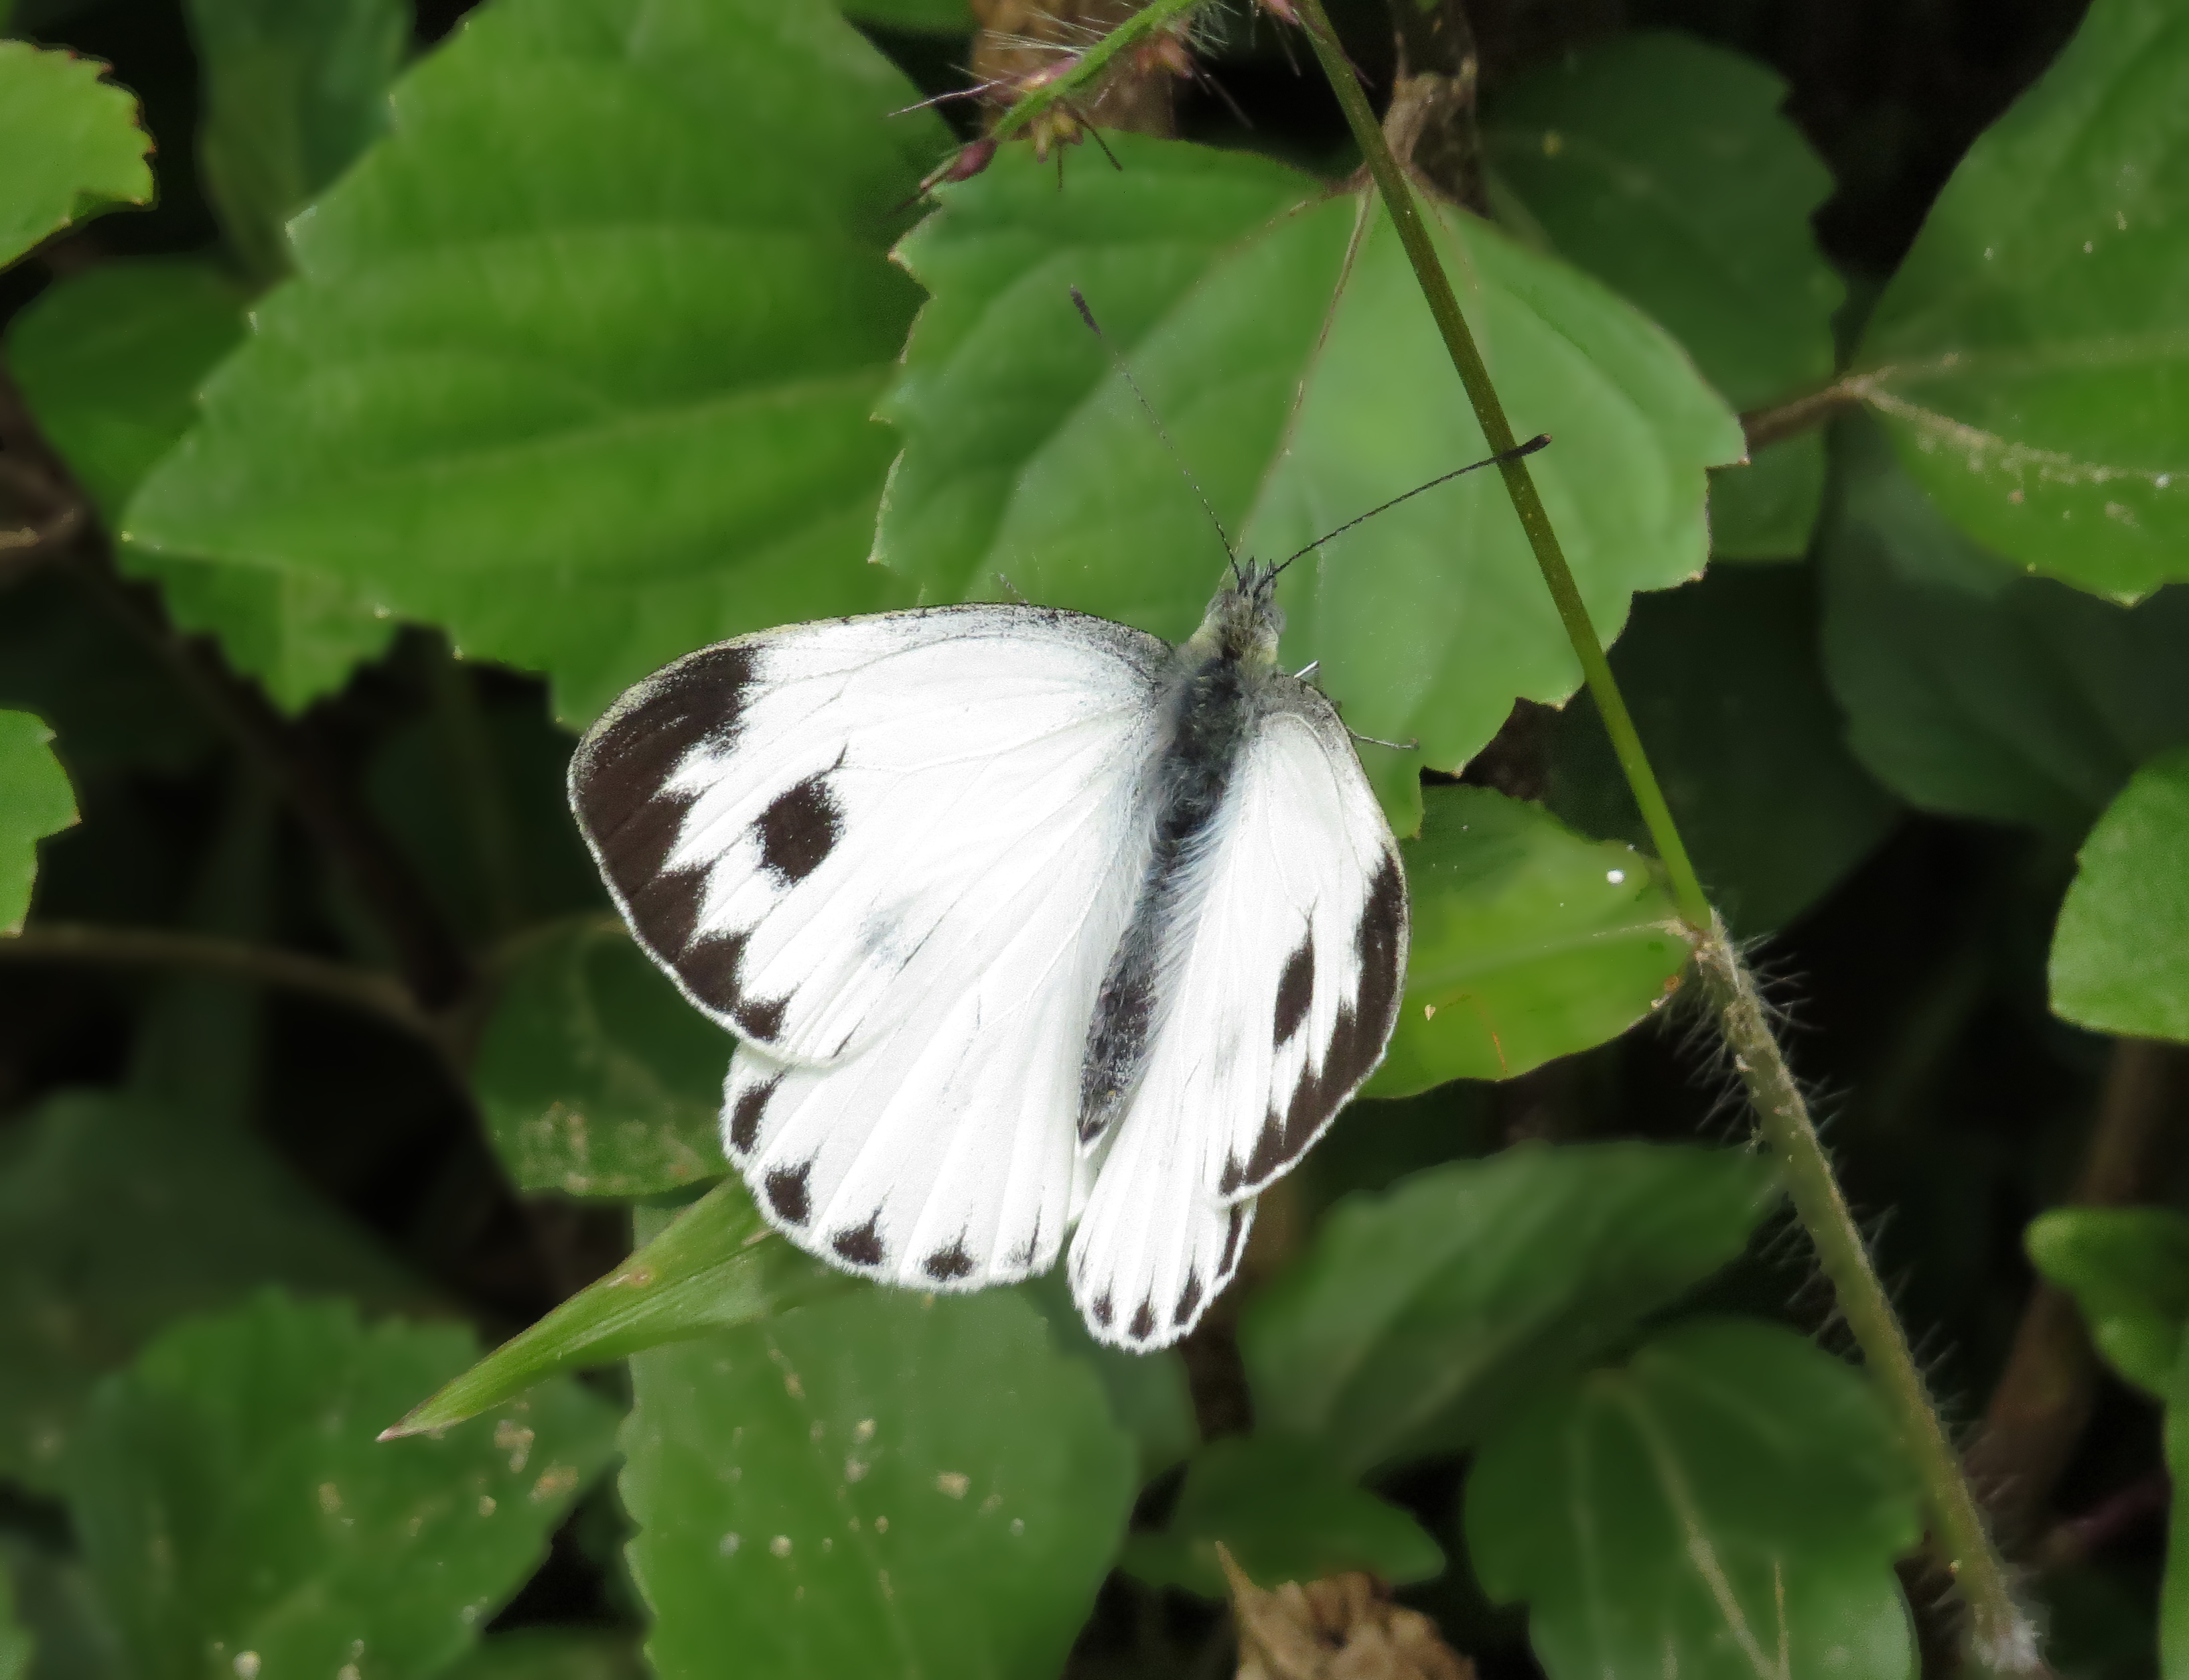 File:Indian Cabbage White Butterfly.jpg - Wikimedia Commons